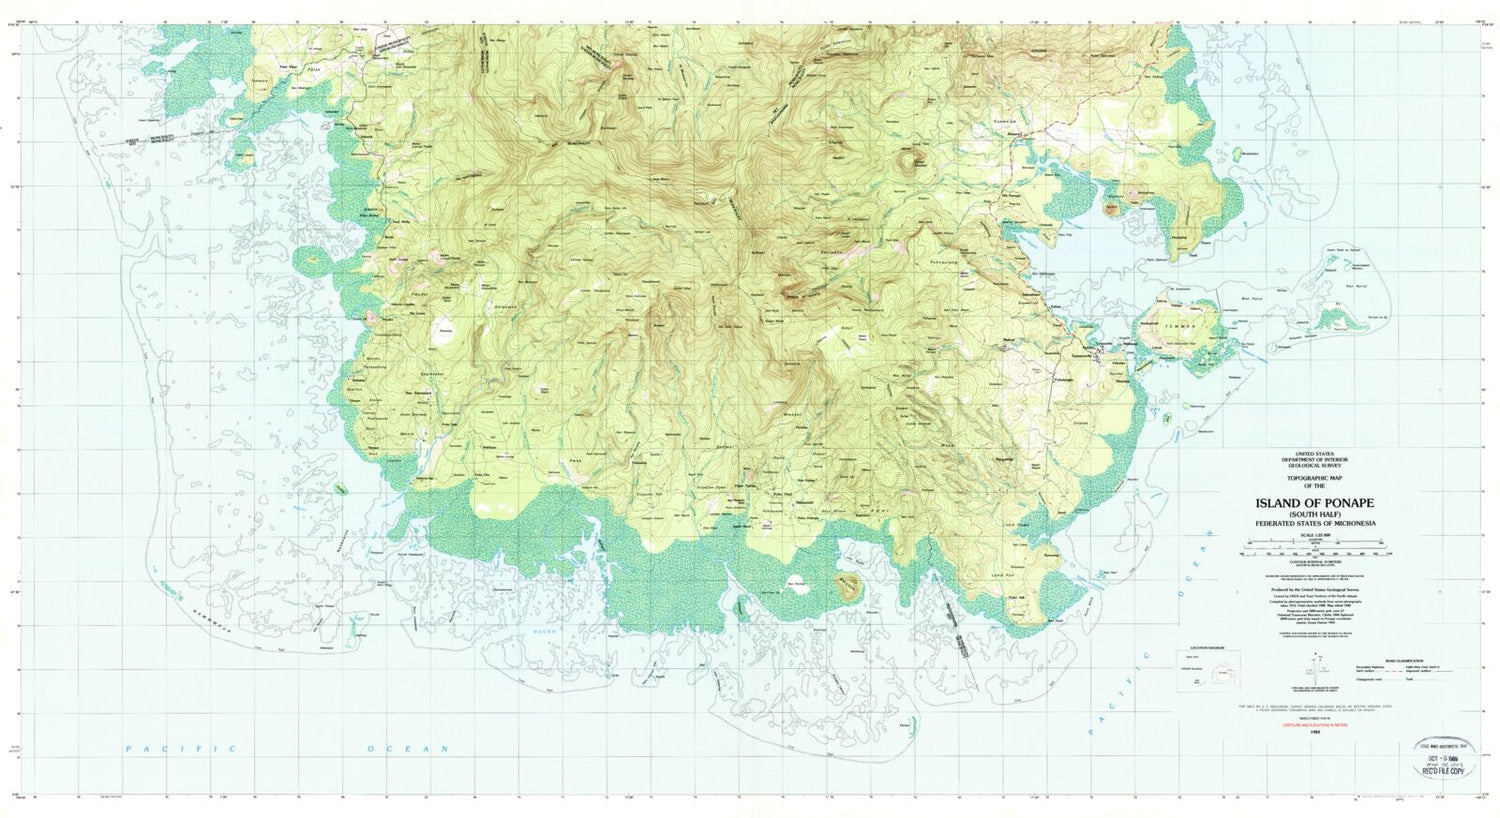 Classic USGS Island of Pohnpei (South Half) Federated States of Micronesia 7.5'x7.5' Topo Map Image